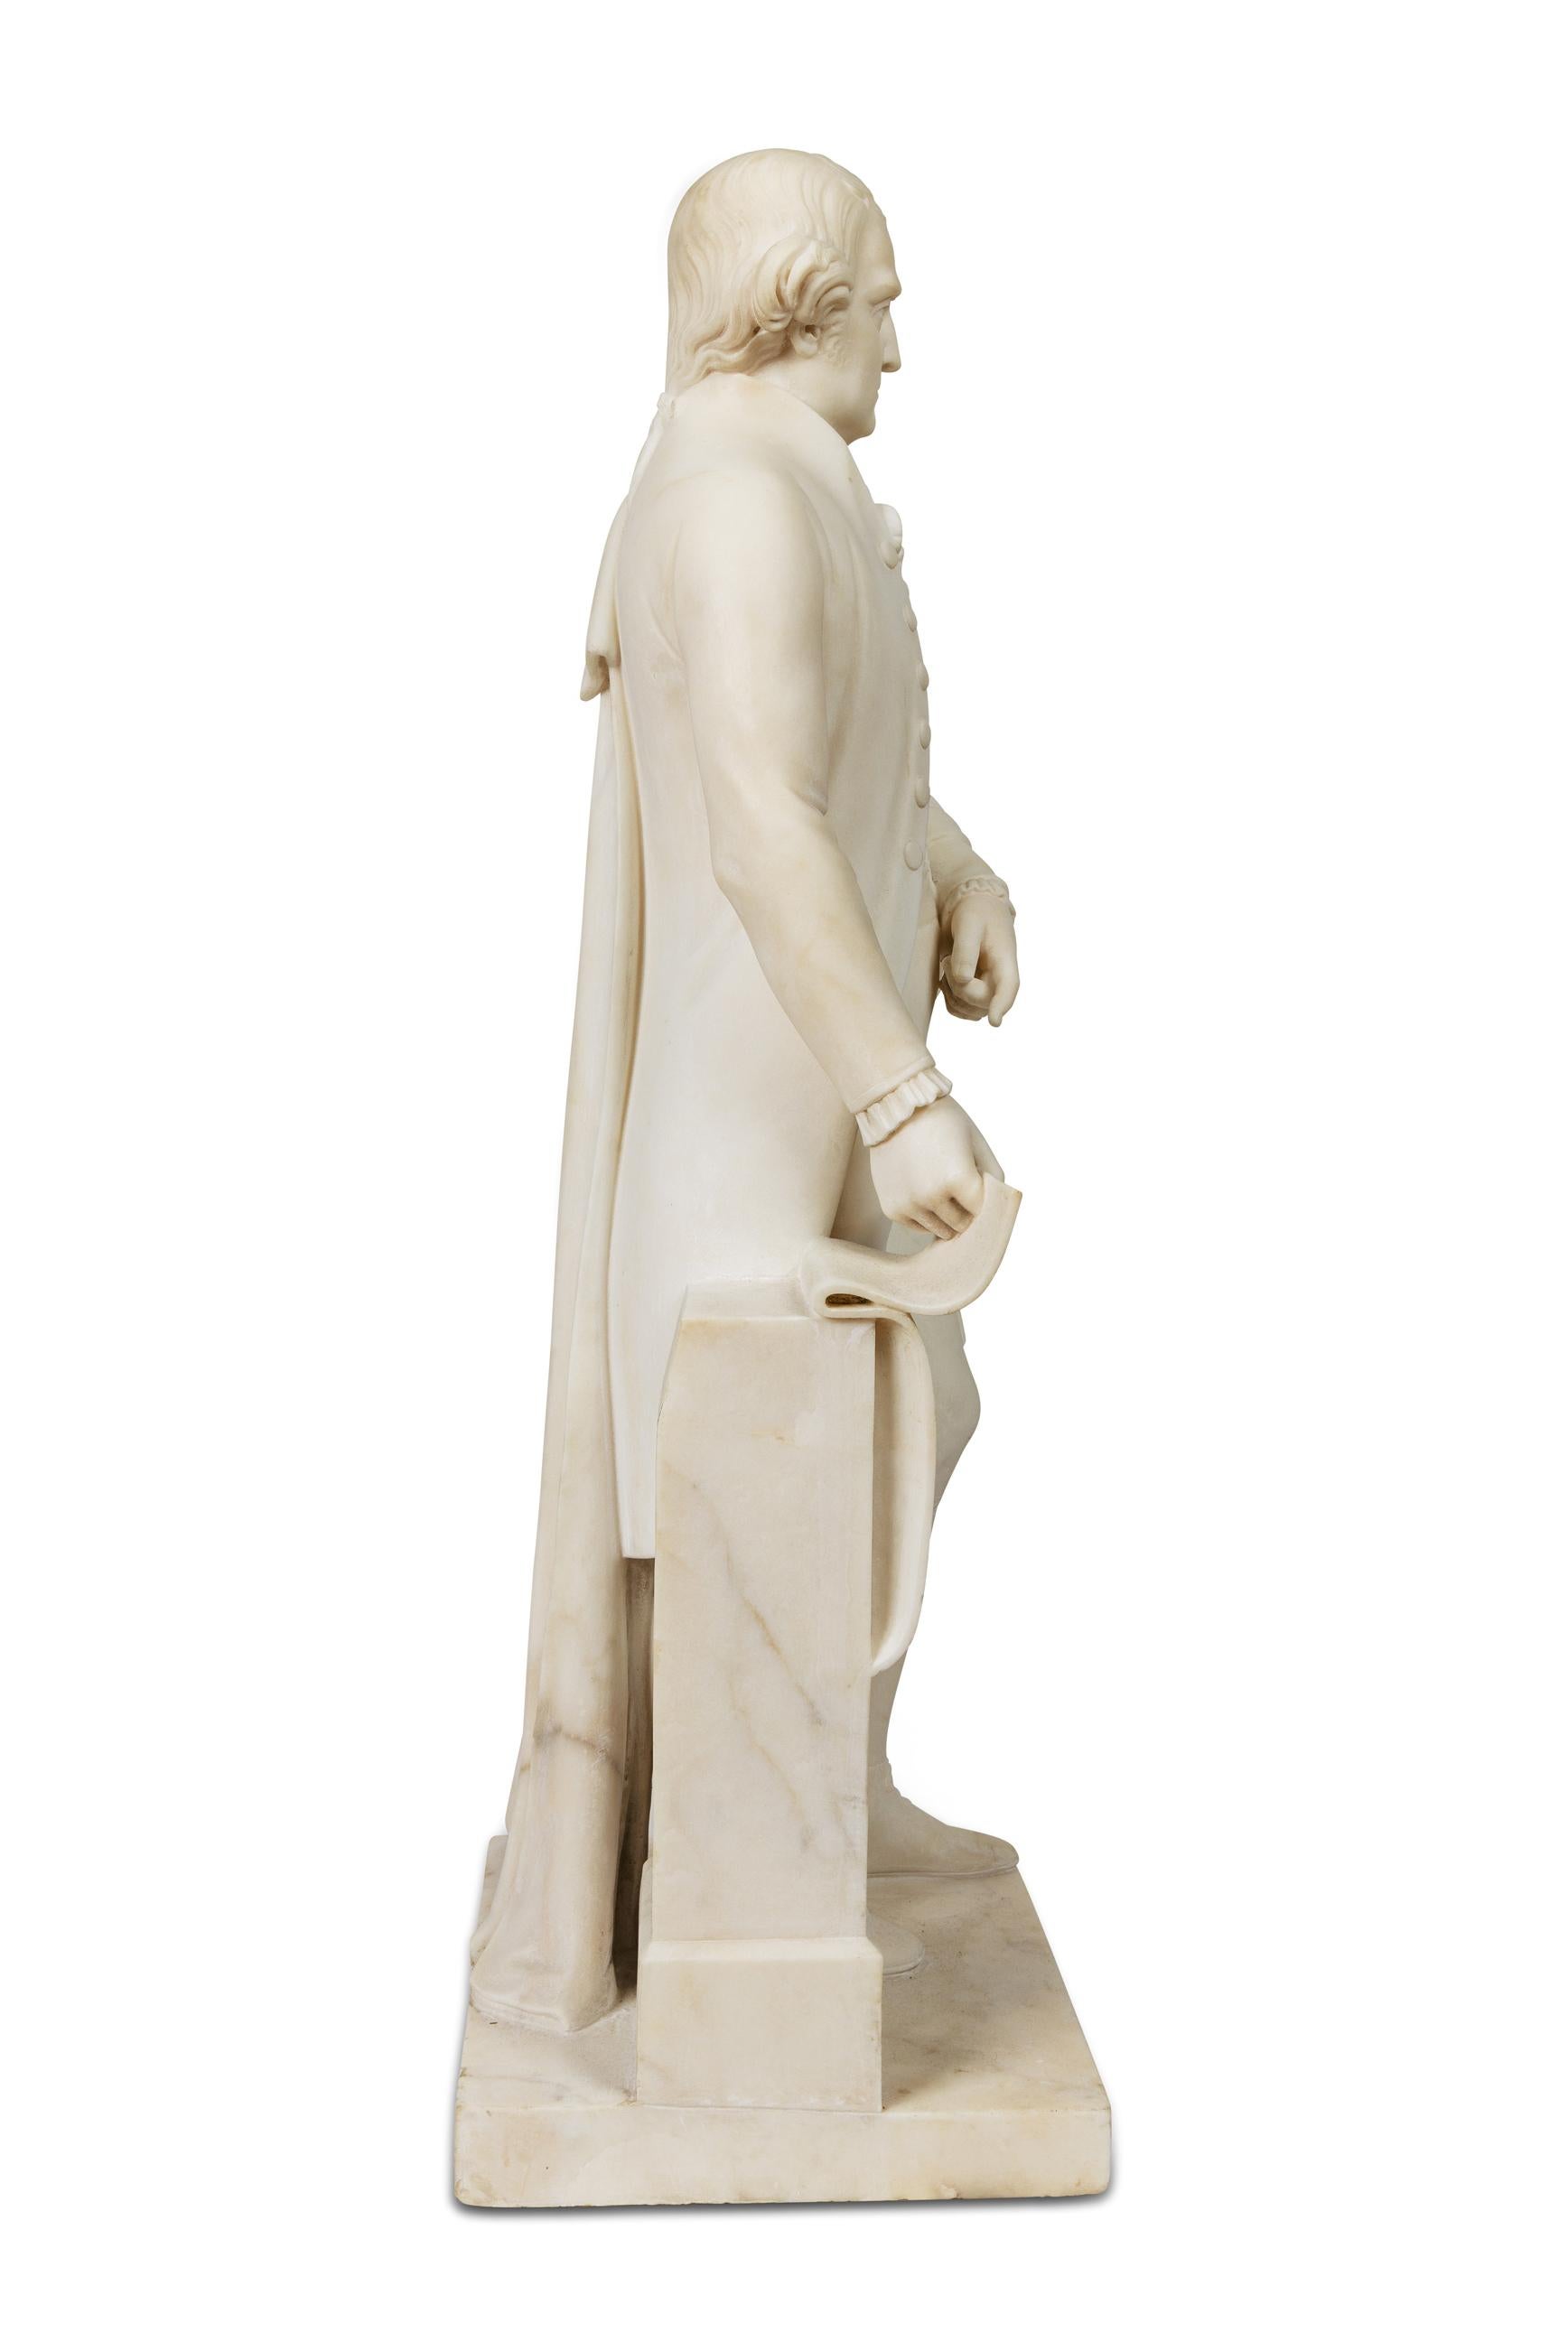 A Rare and Important American Marble Sculpture of Thomas Jefferson, Circa 1870 For Sale 4